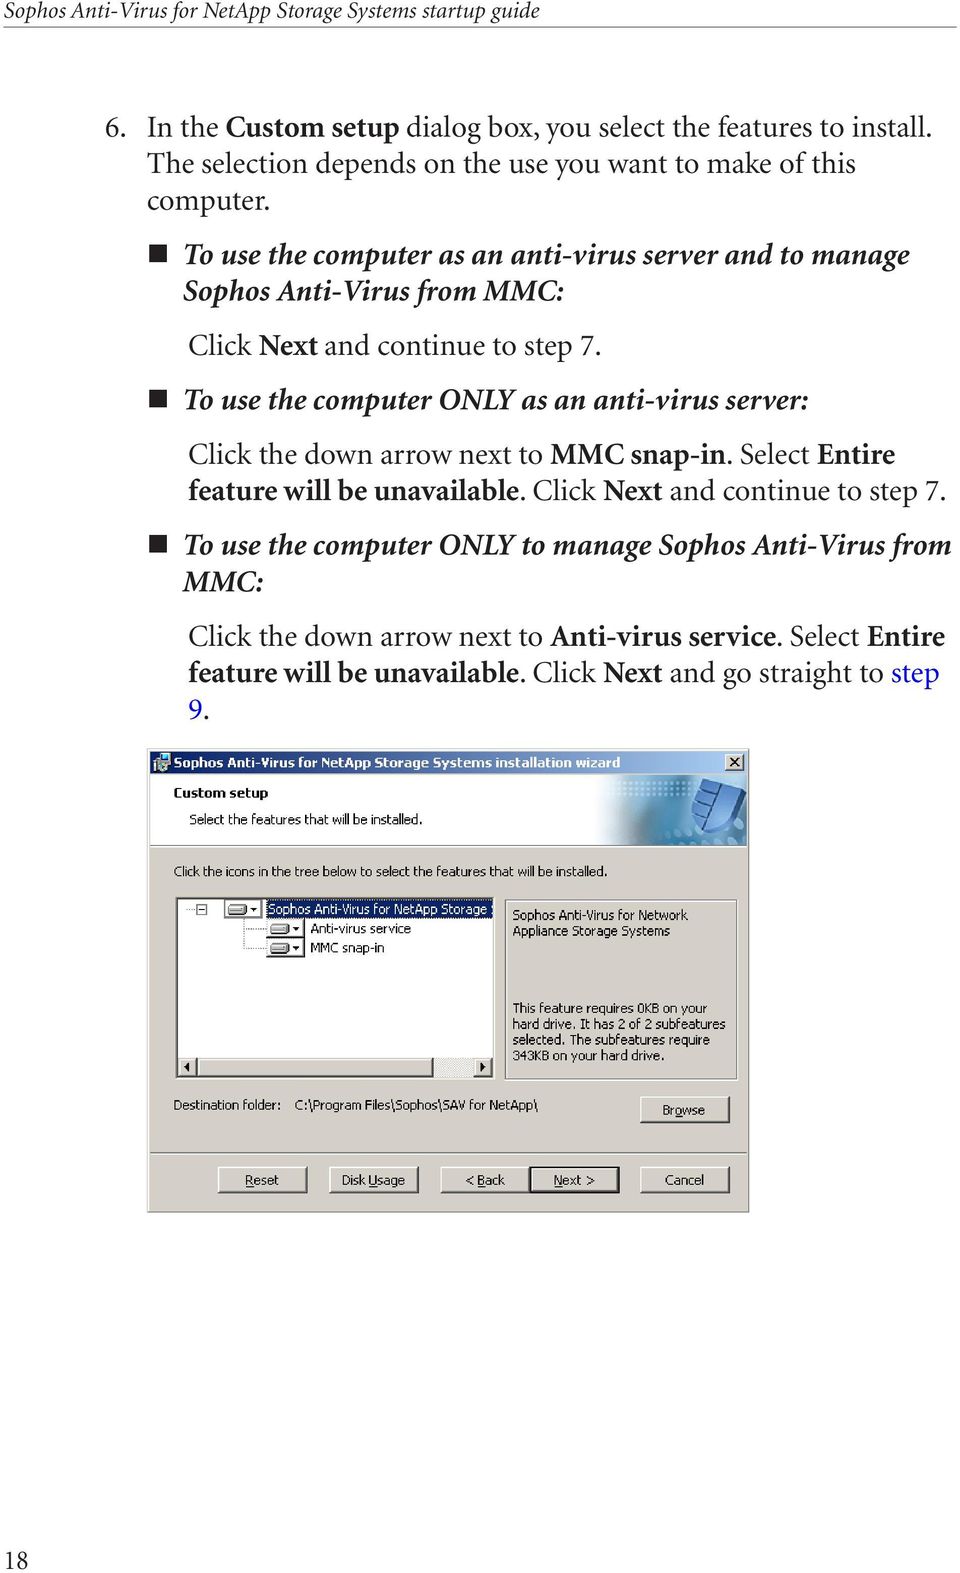 To use the computer ONLY as an anti-virus server: Click the down arrow next to MMC snap-in. Select Entire feature will be unavailable.